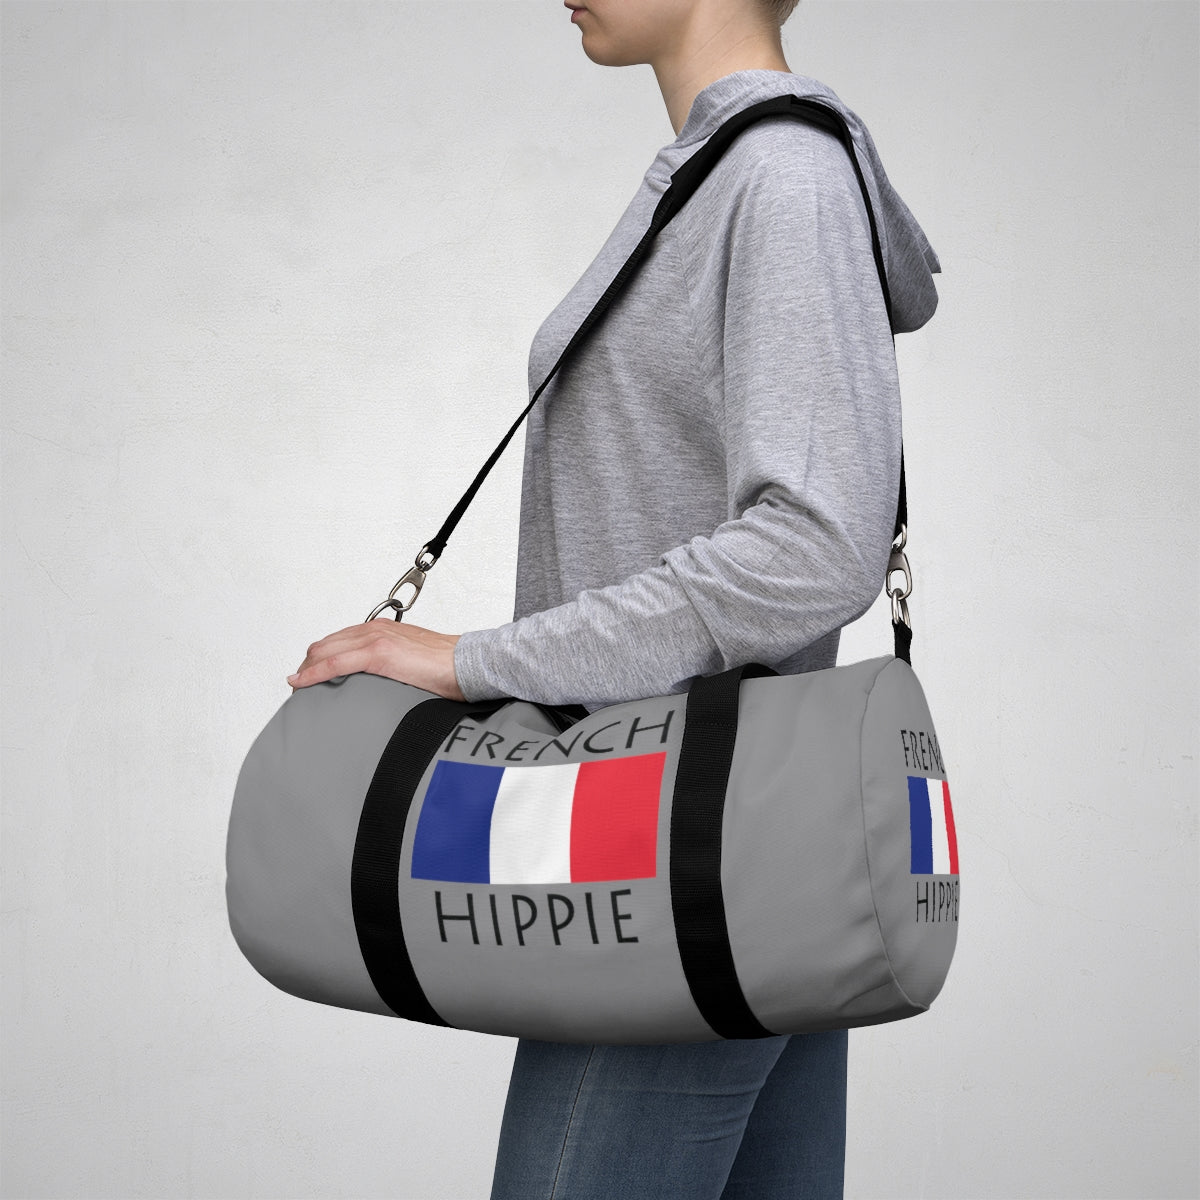 You will love Stately Wear's French Flag Hippie duffel bag. Katie Couric Shop partner. Perfect accessory as a beach bag, ski bag, travel bag & gym or yoga bag.  Custom made one-at-a-time.  Environmentally friendly.  Biodegradable inks & dyes.  Good for the planet. 2 sizes to choose.